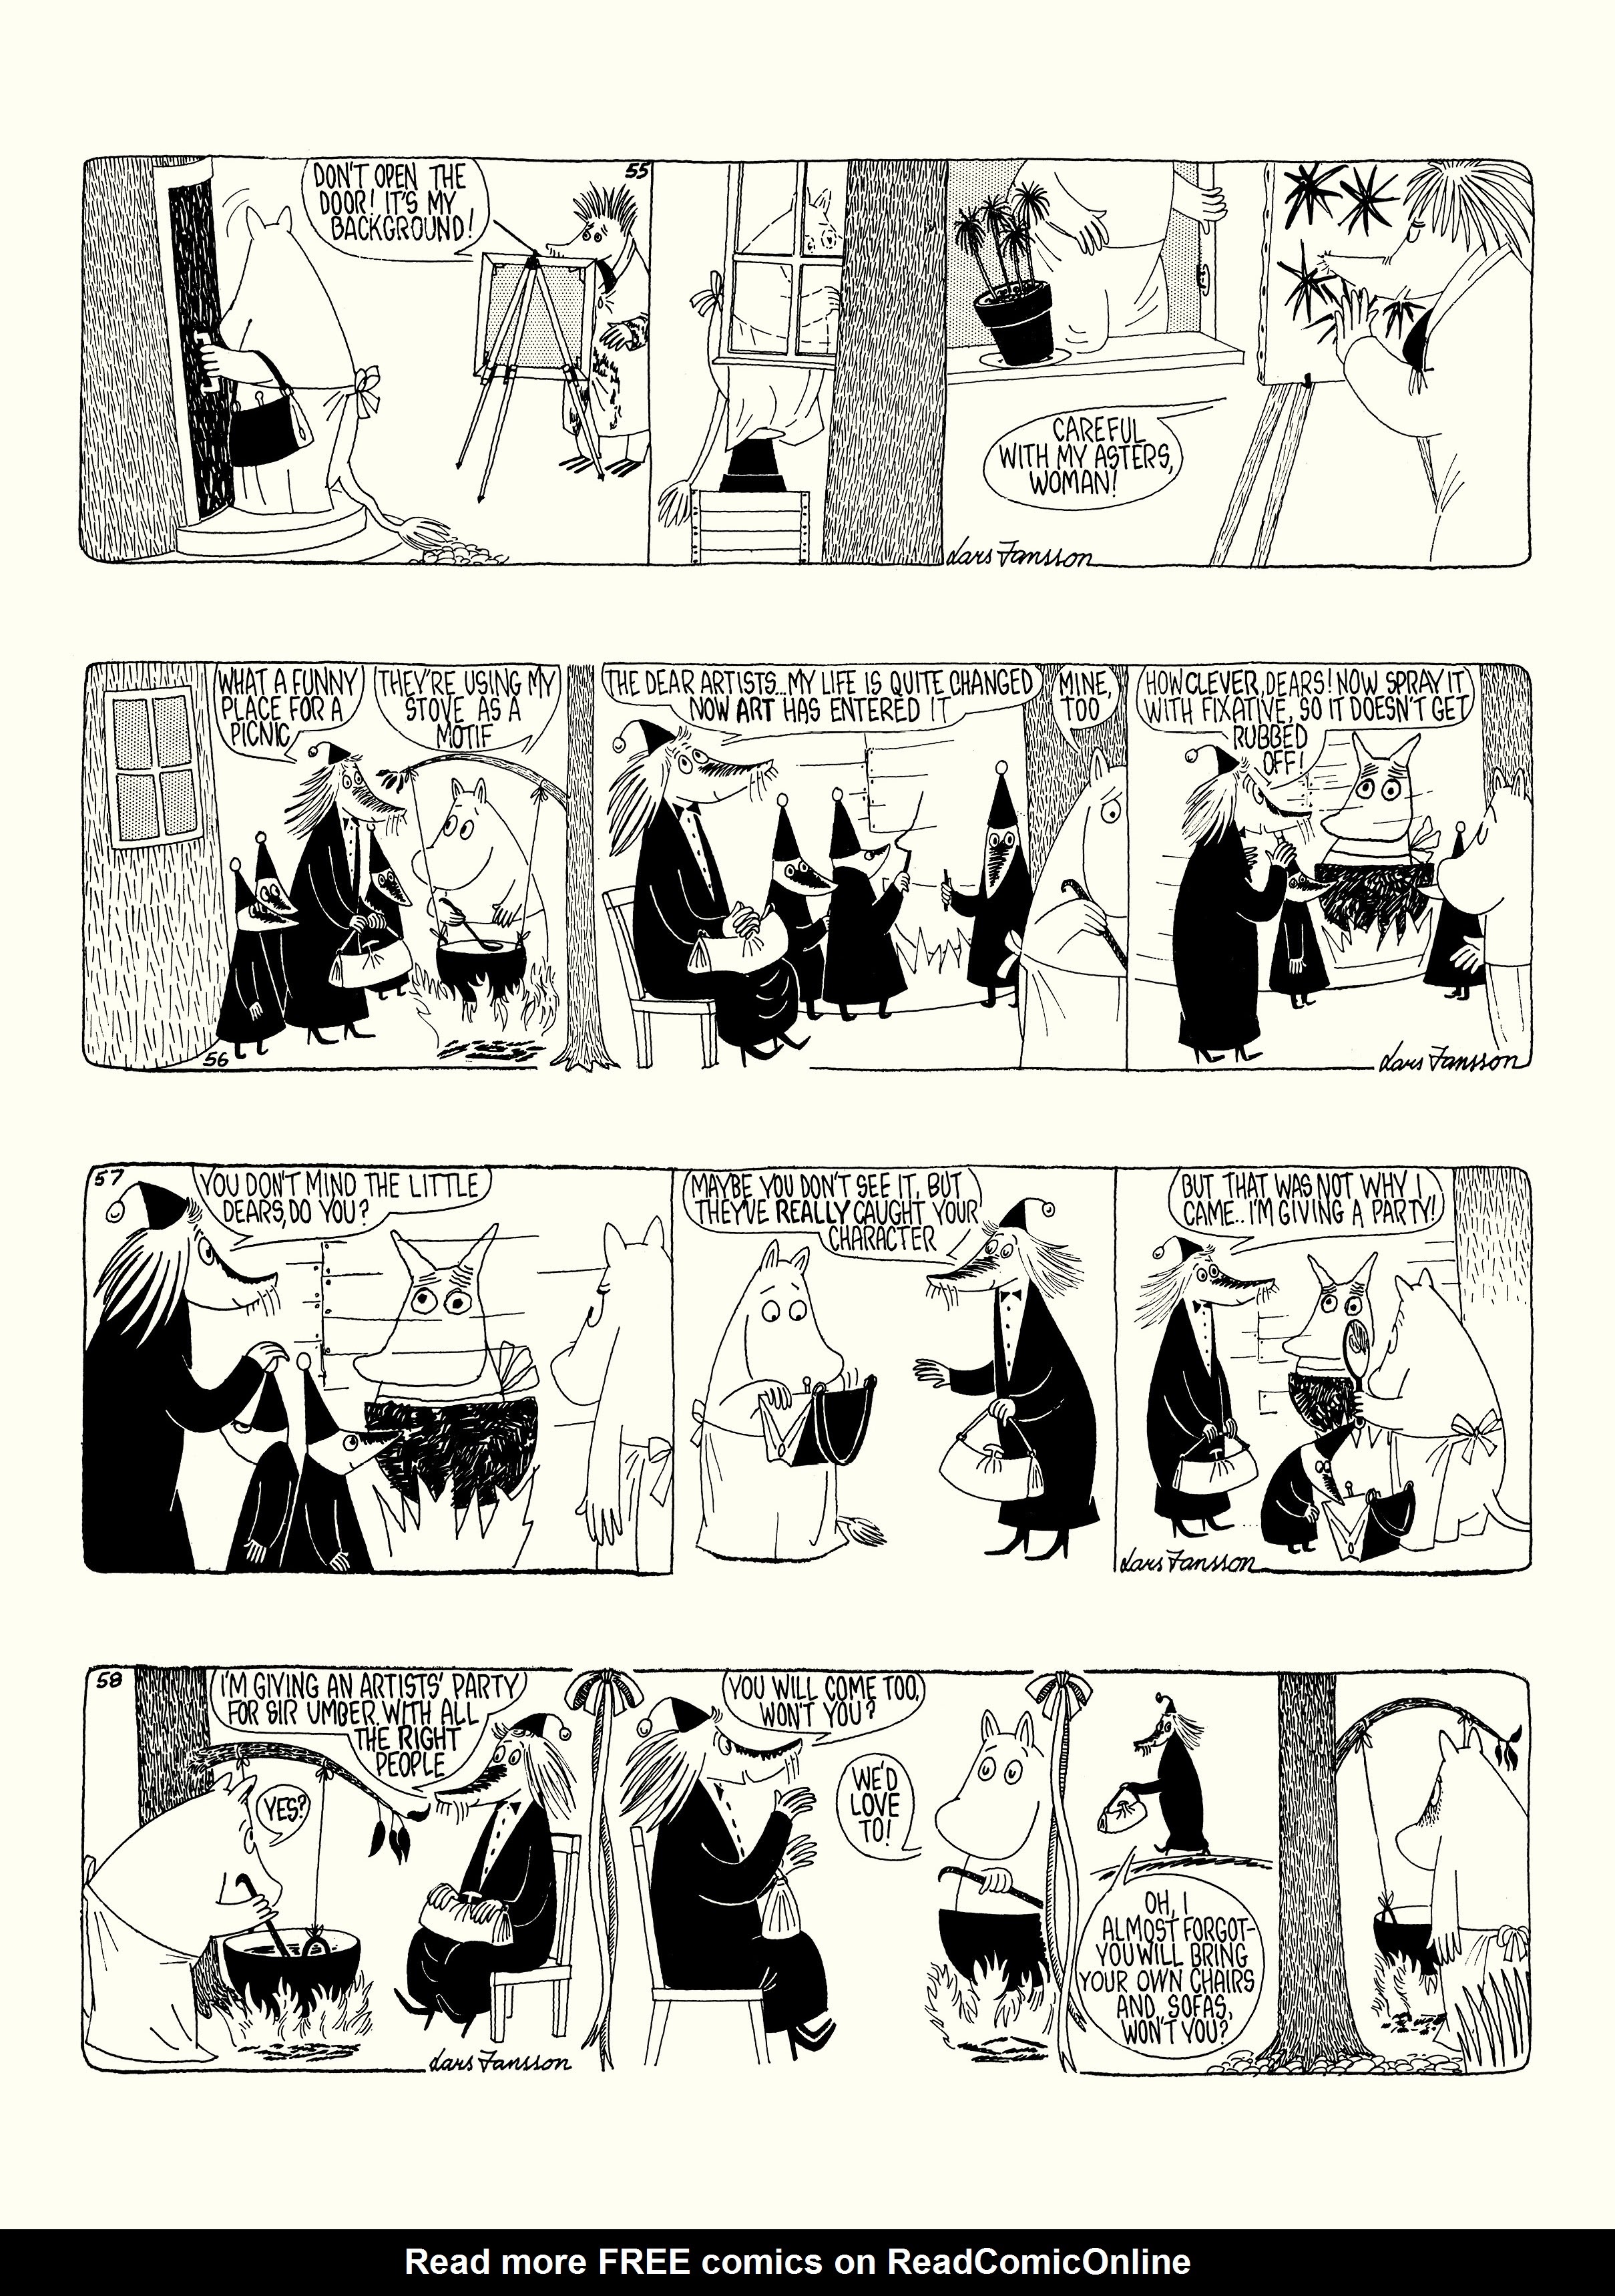 Read online Moomin: The Complete Lars Jansson Comic Strip comic -  Issue # TPB 8 - 41